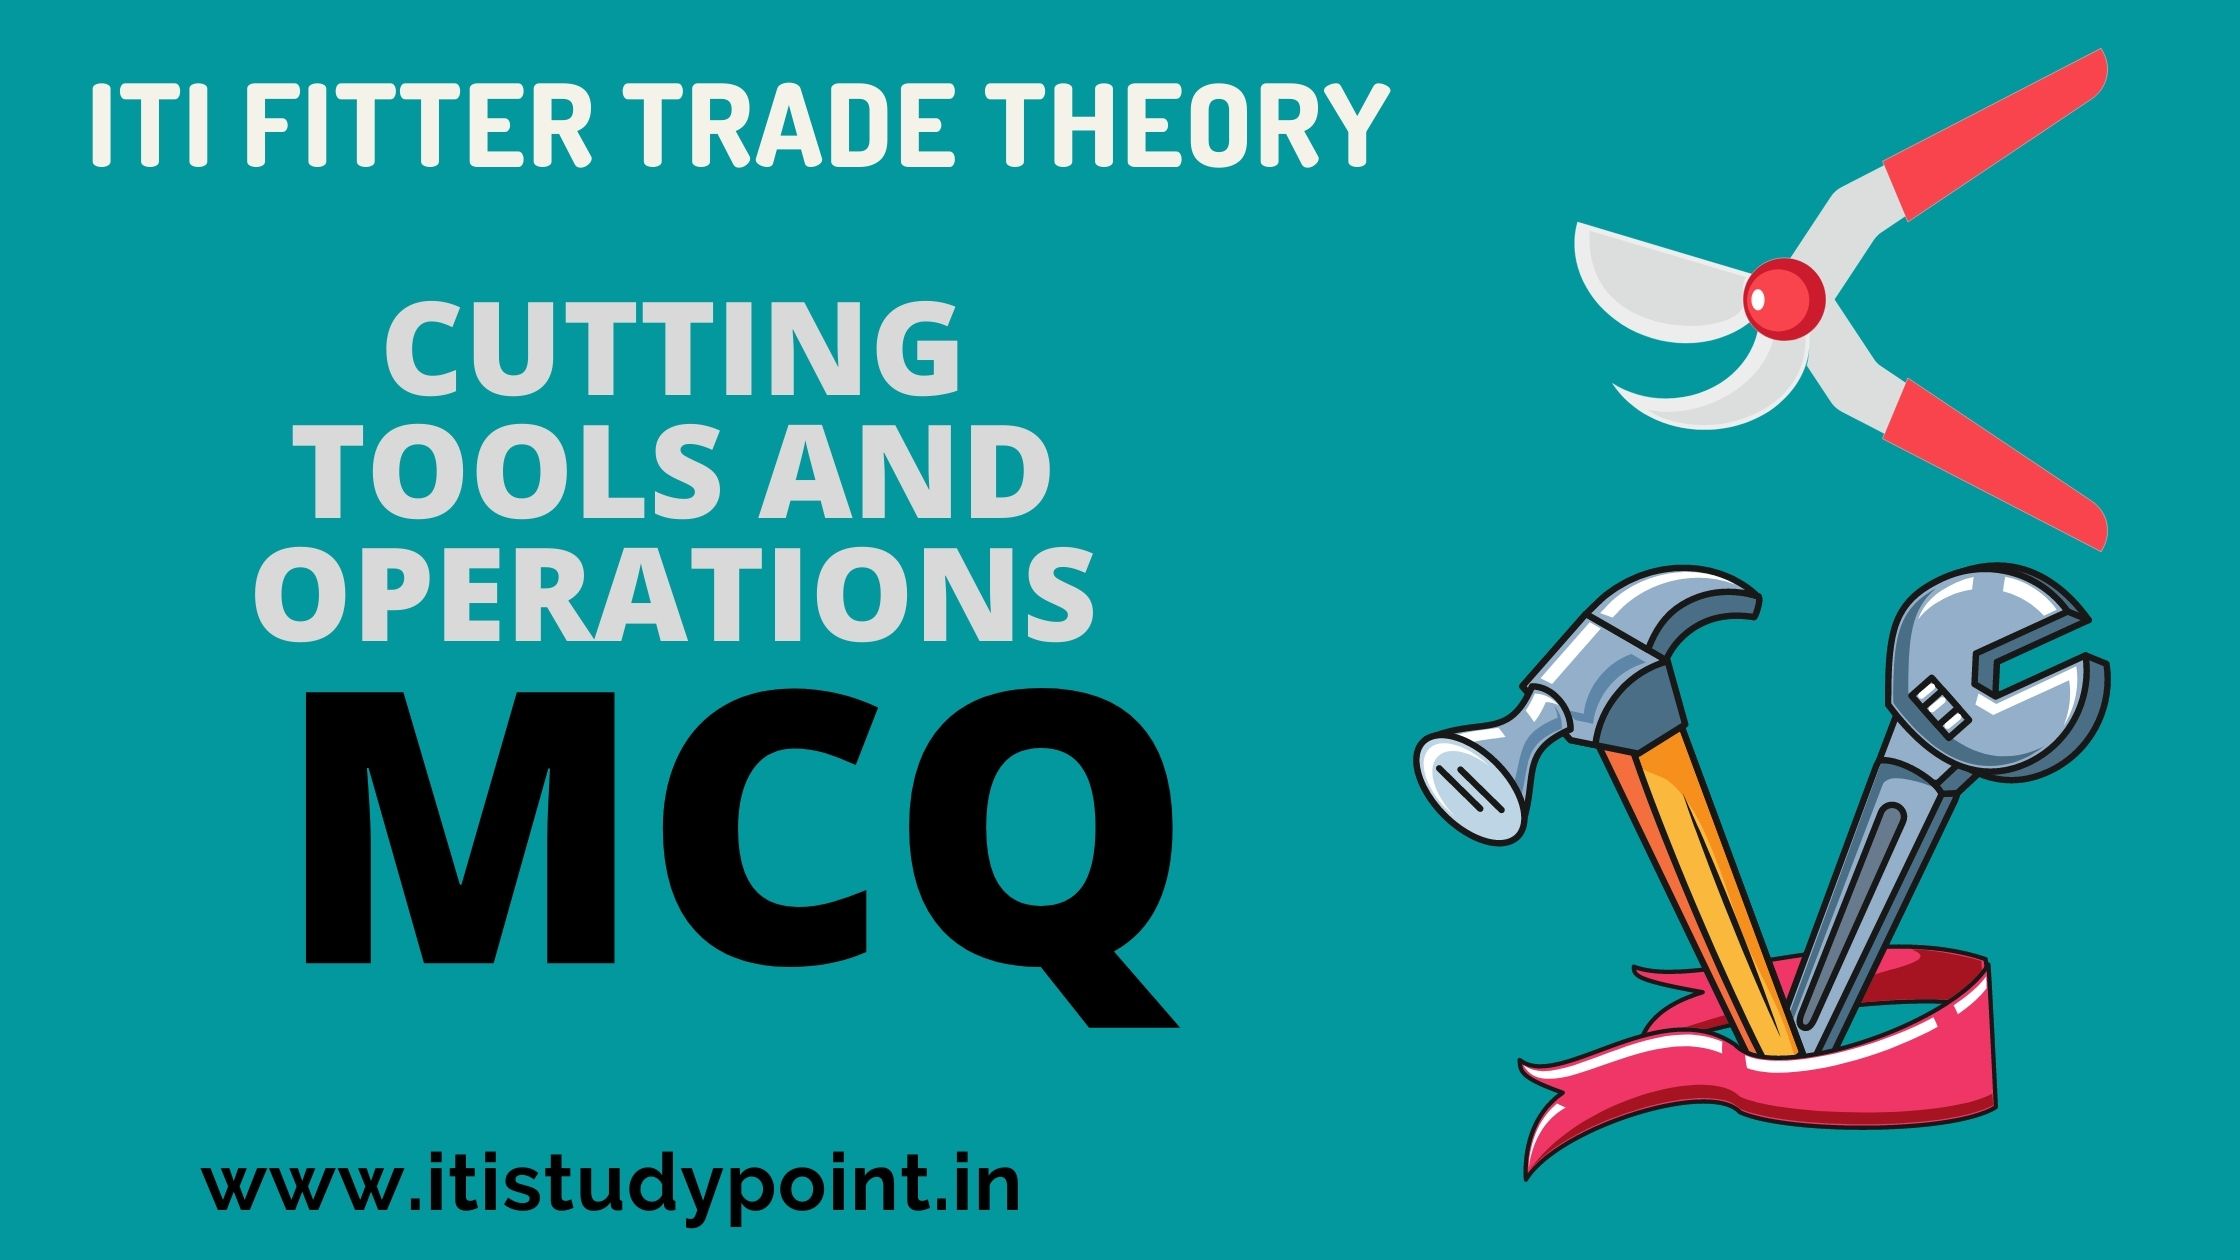 CUTTING TOOLS AND OPERATIONS MCQ 4